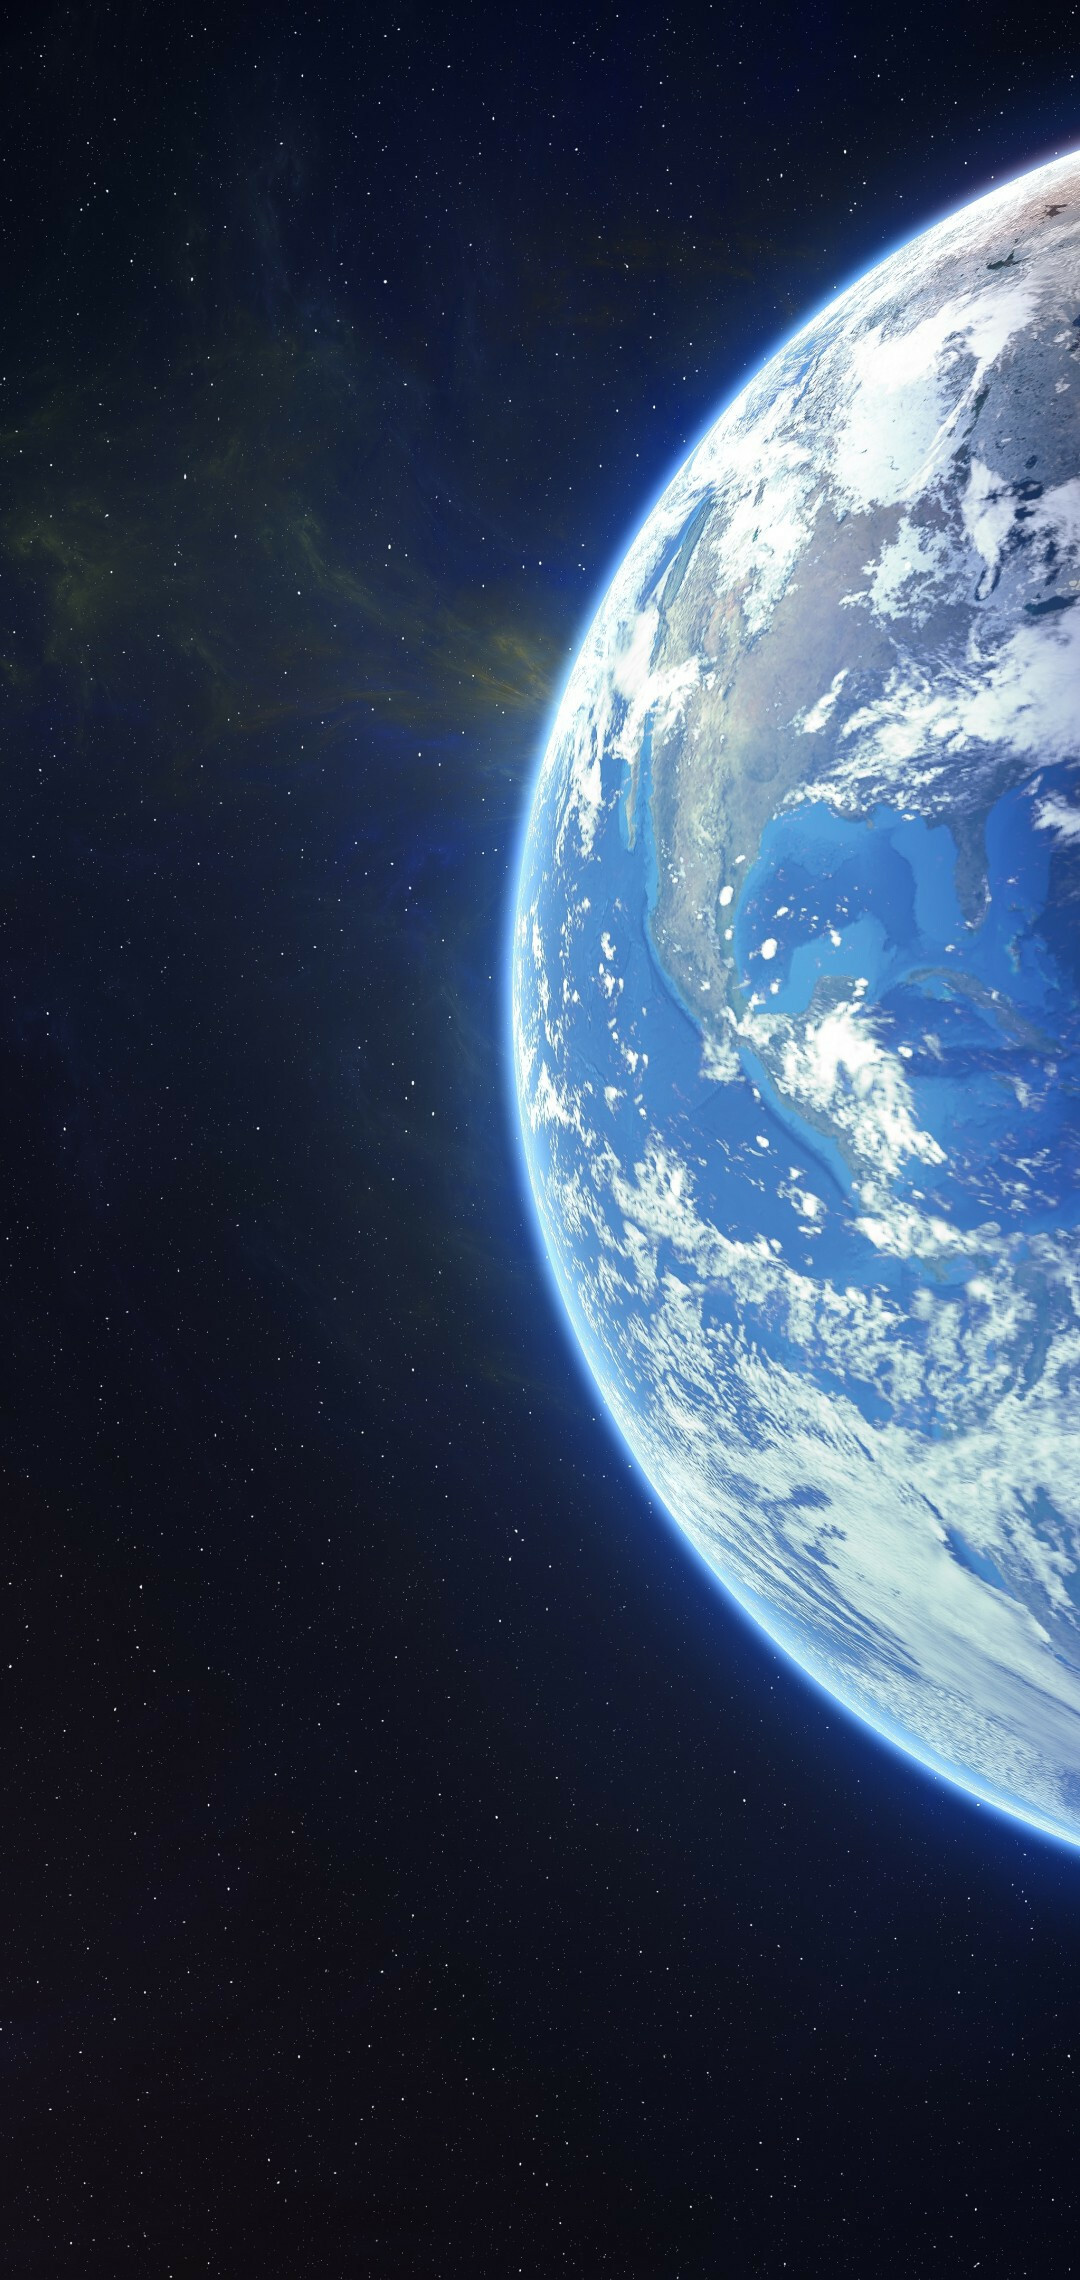 Solar System: Earth, One of the four rocky planets. 1080x2280 HD Wallpaper.